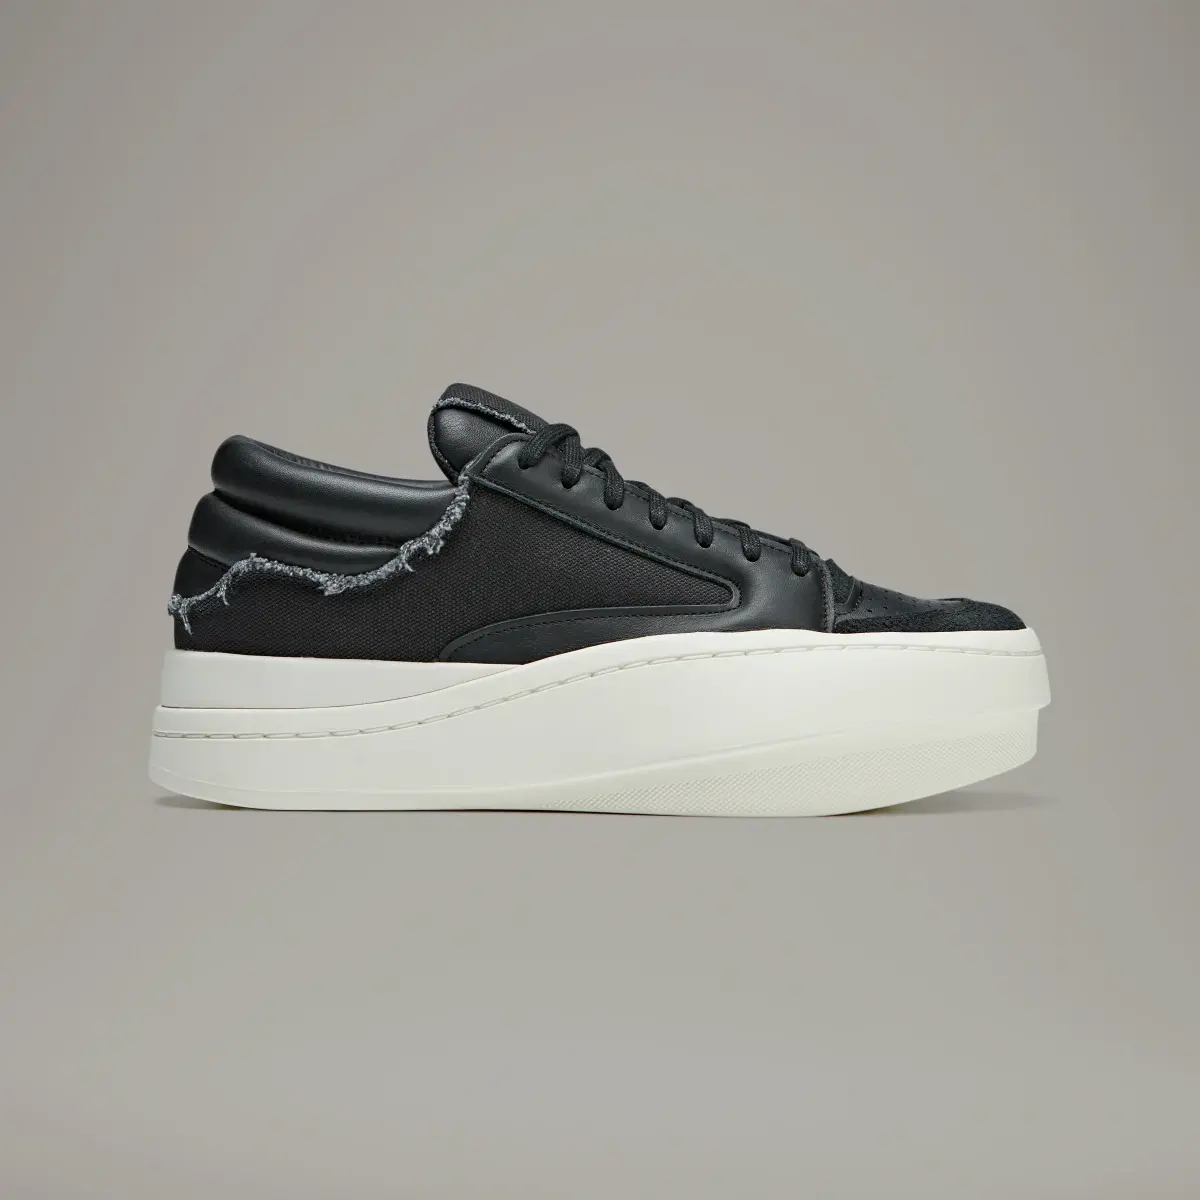 Adidas Y-3 Centennial Low Shoes. 1